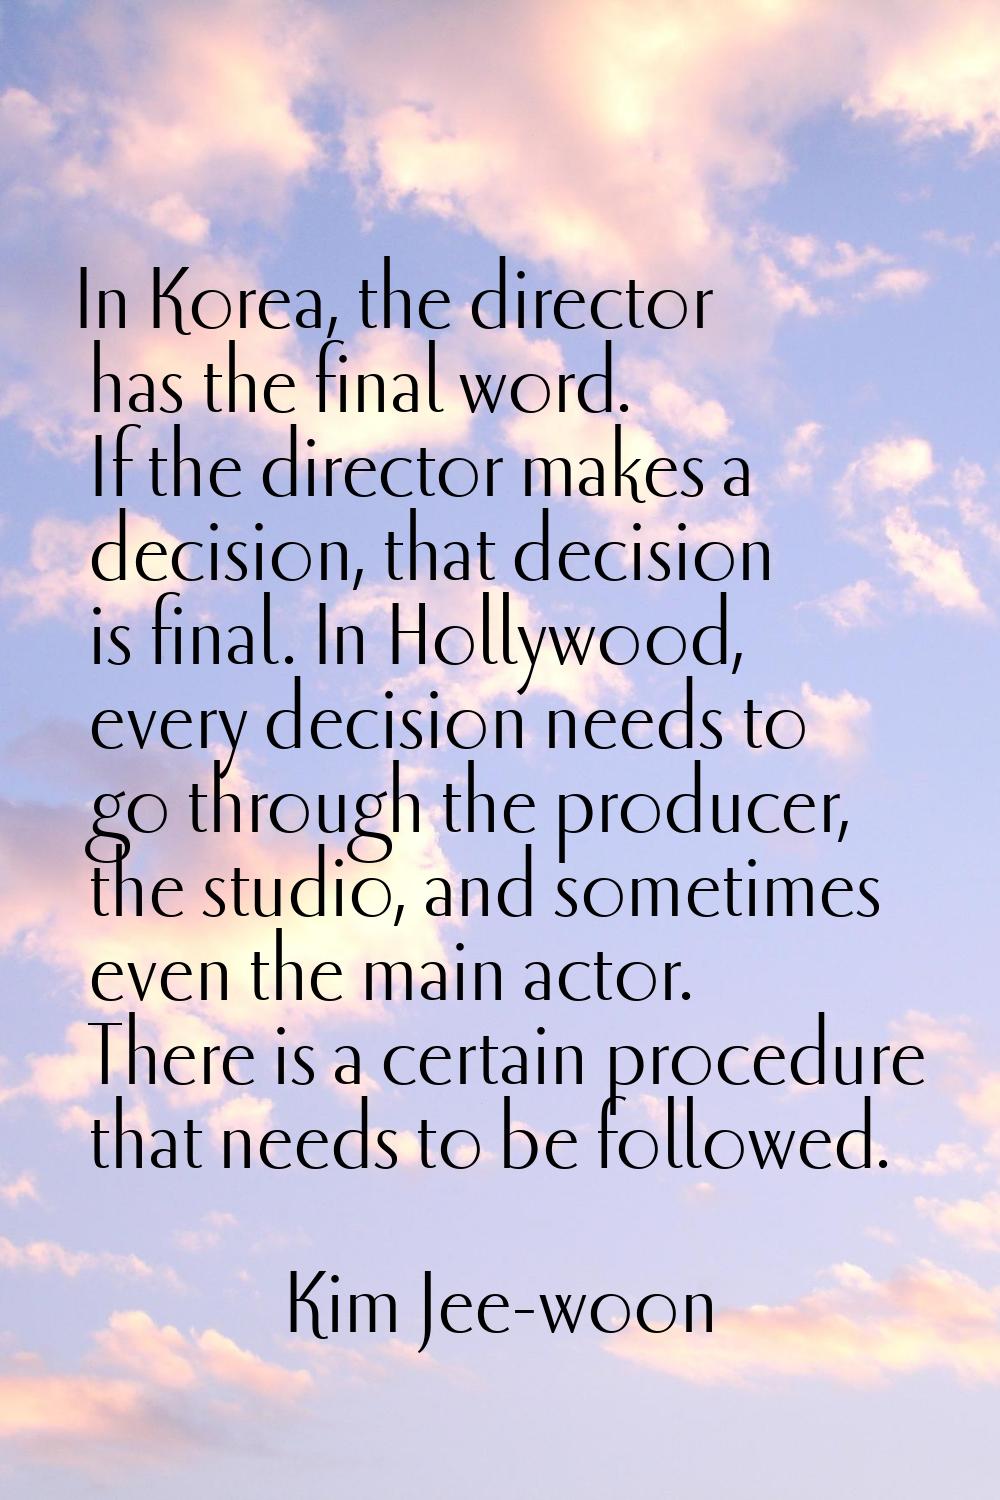 In Korea, the director has the final word. If the director makes a decision, that decision is final